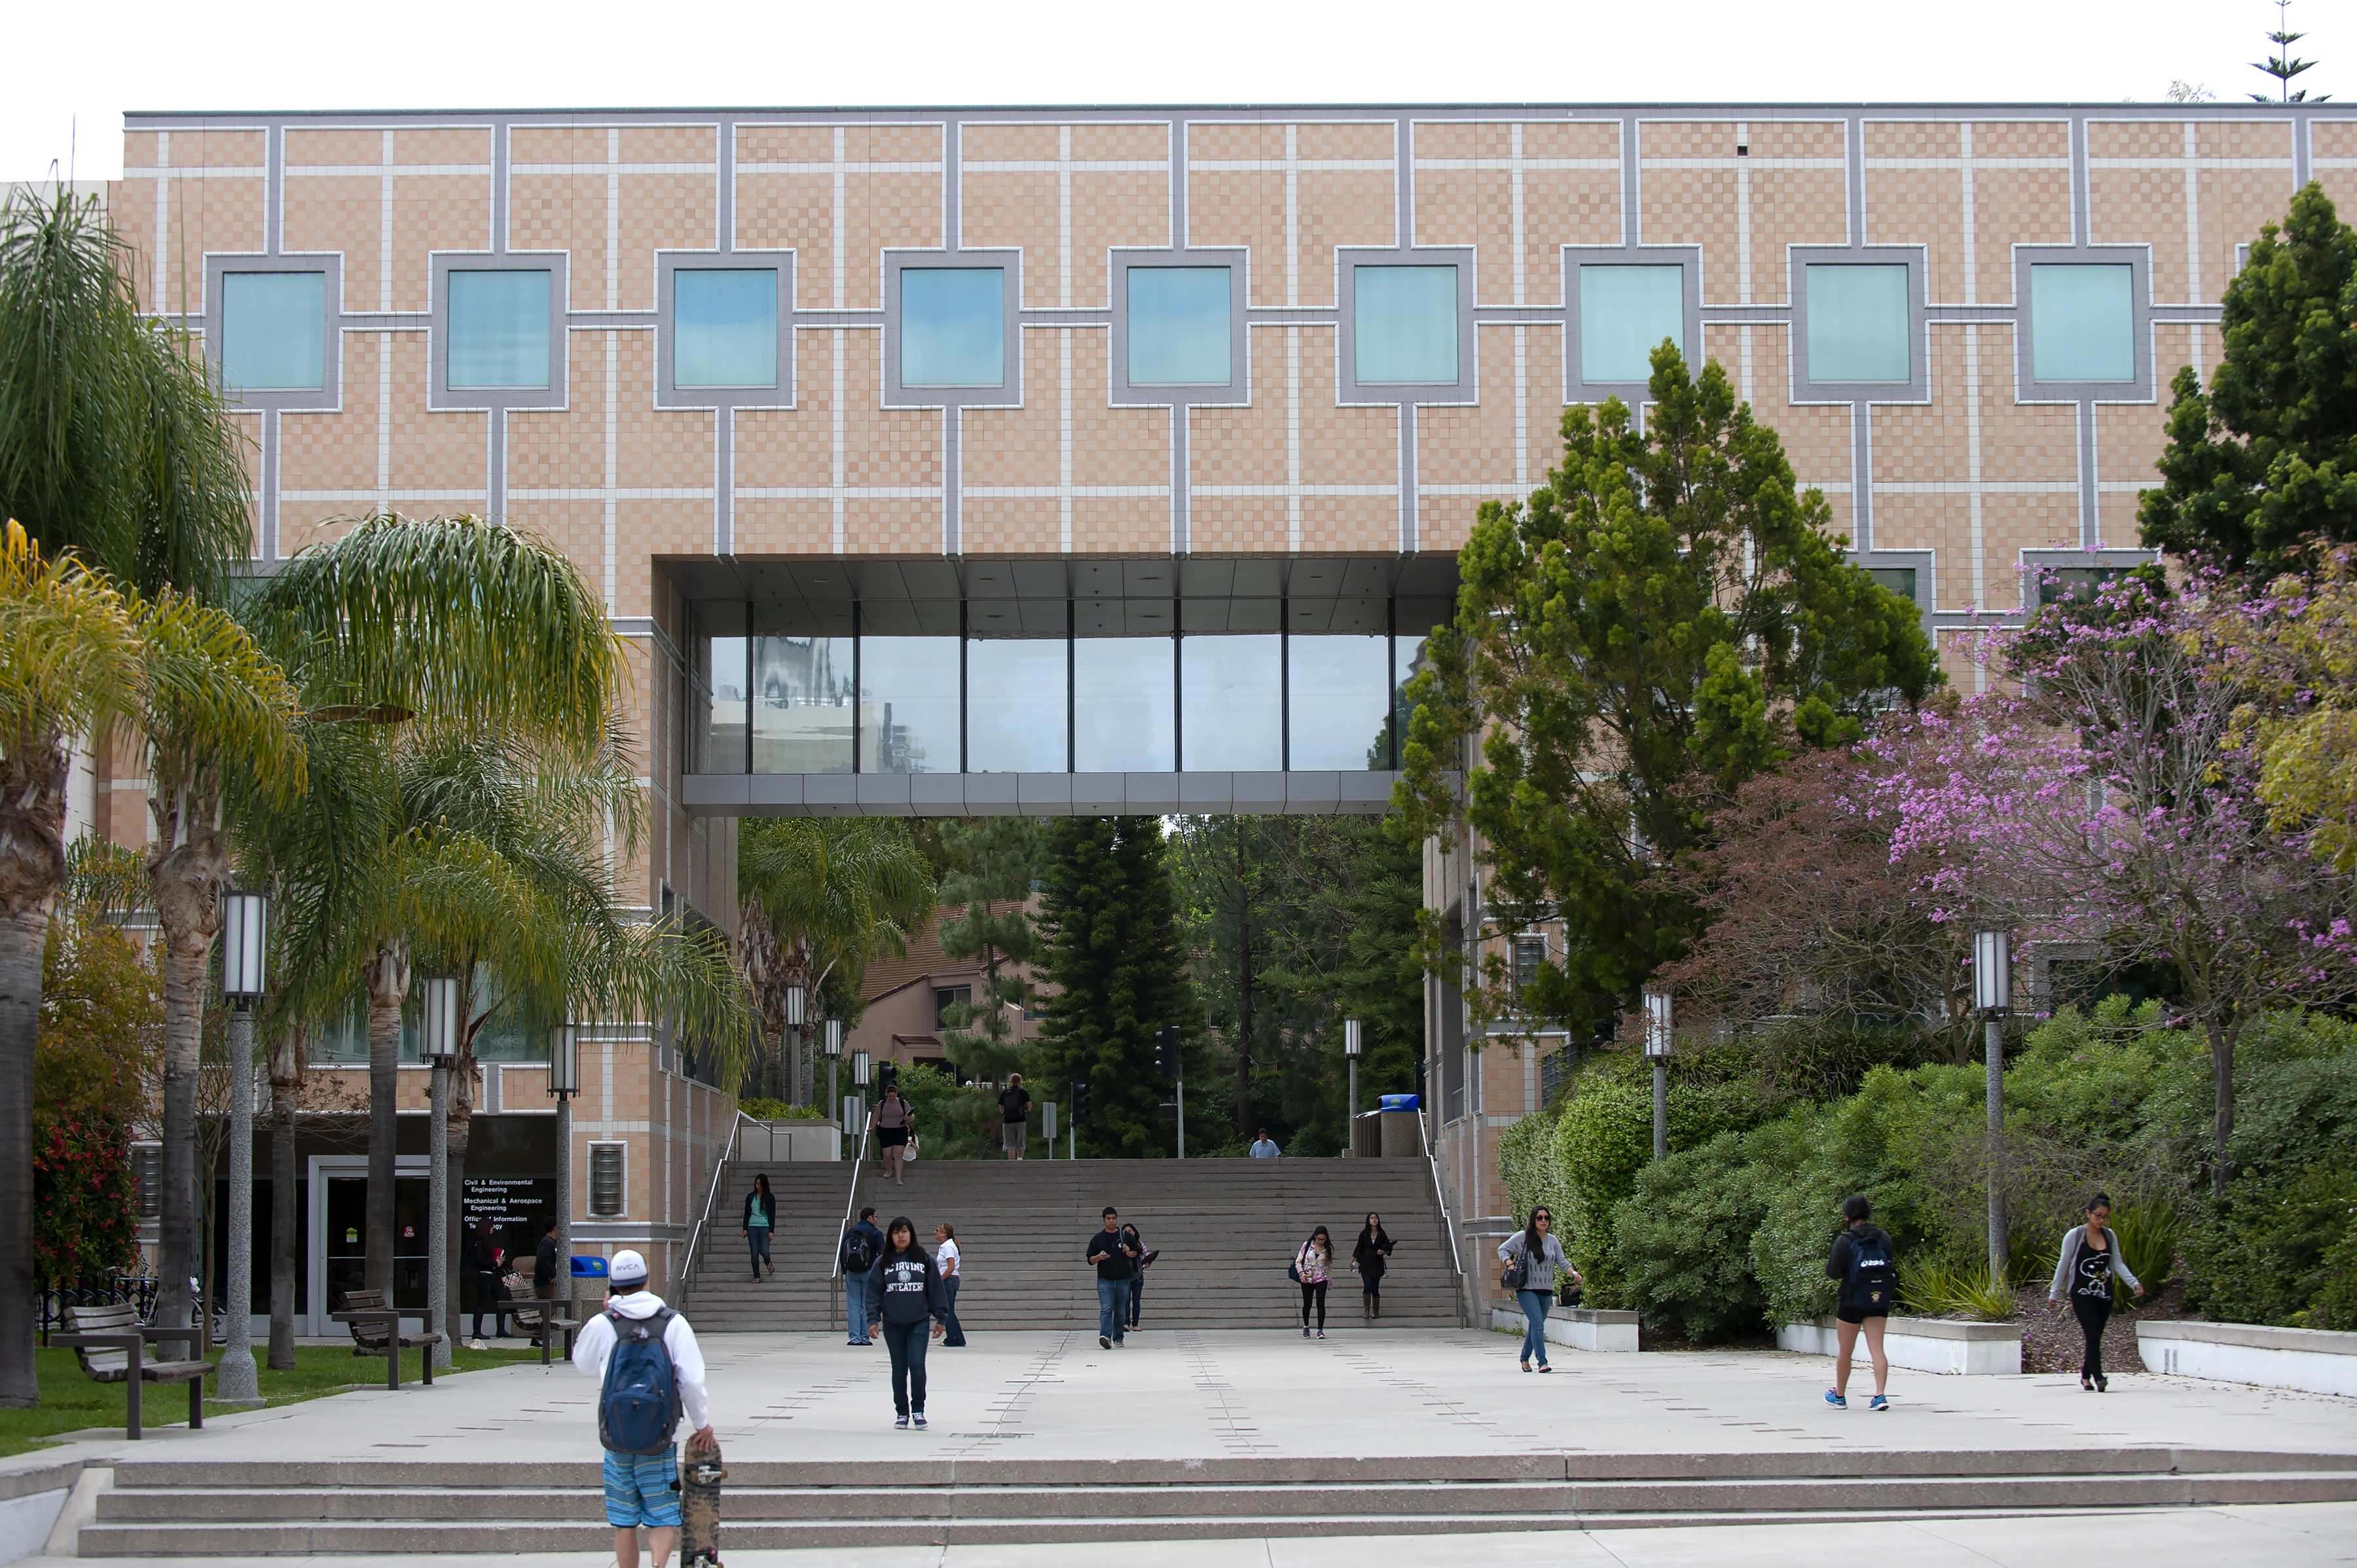 HIMAC, which will be housed in UCI’s Engineering Gateway building, shown here, will be a nexus of interdisciplinary research. Steve Zylius / UCI